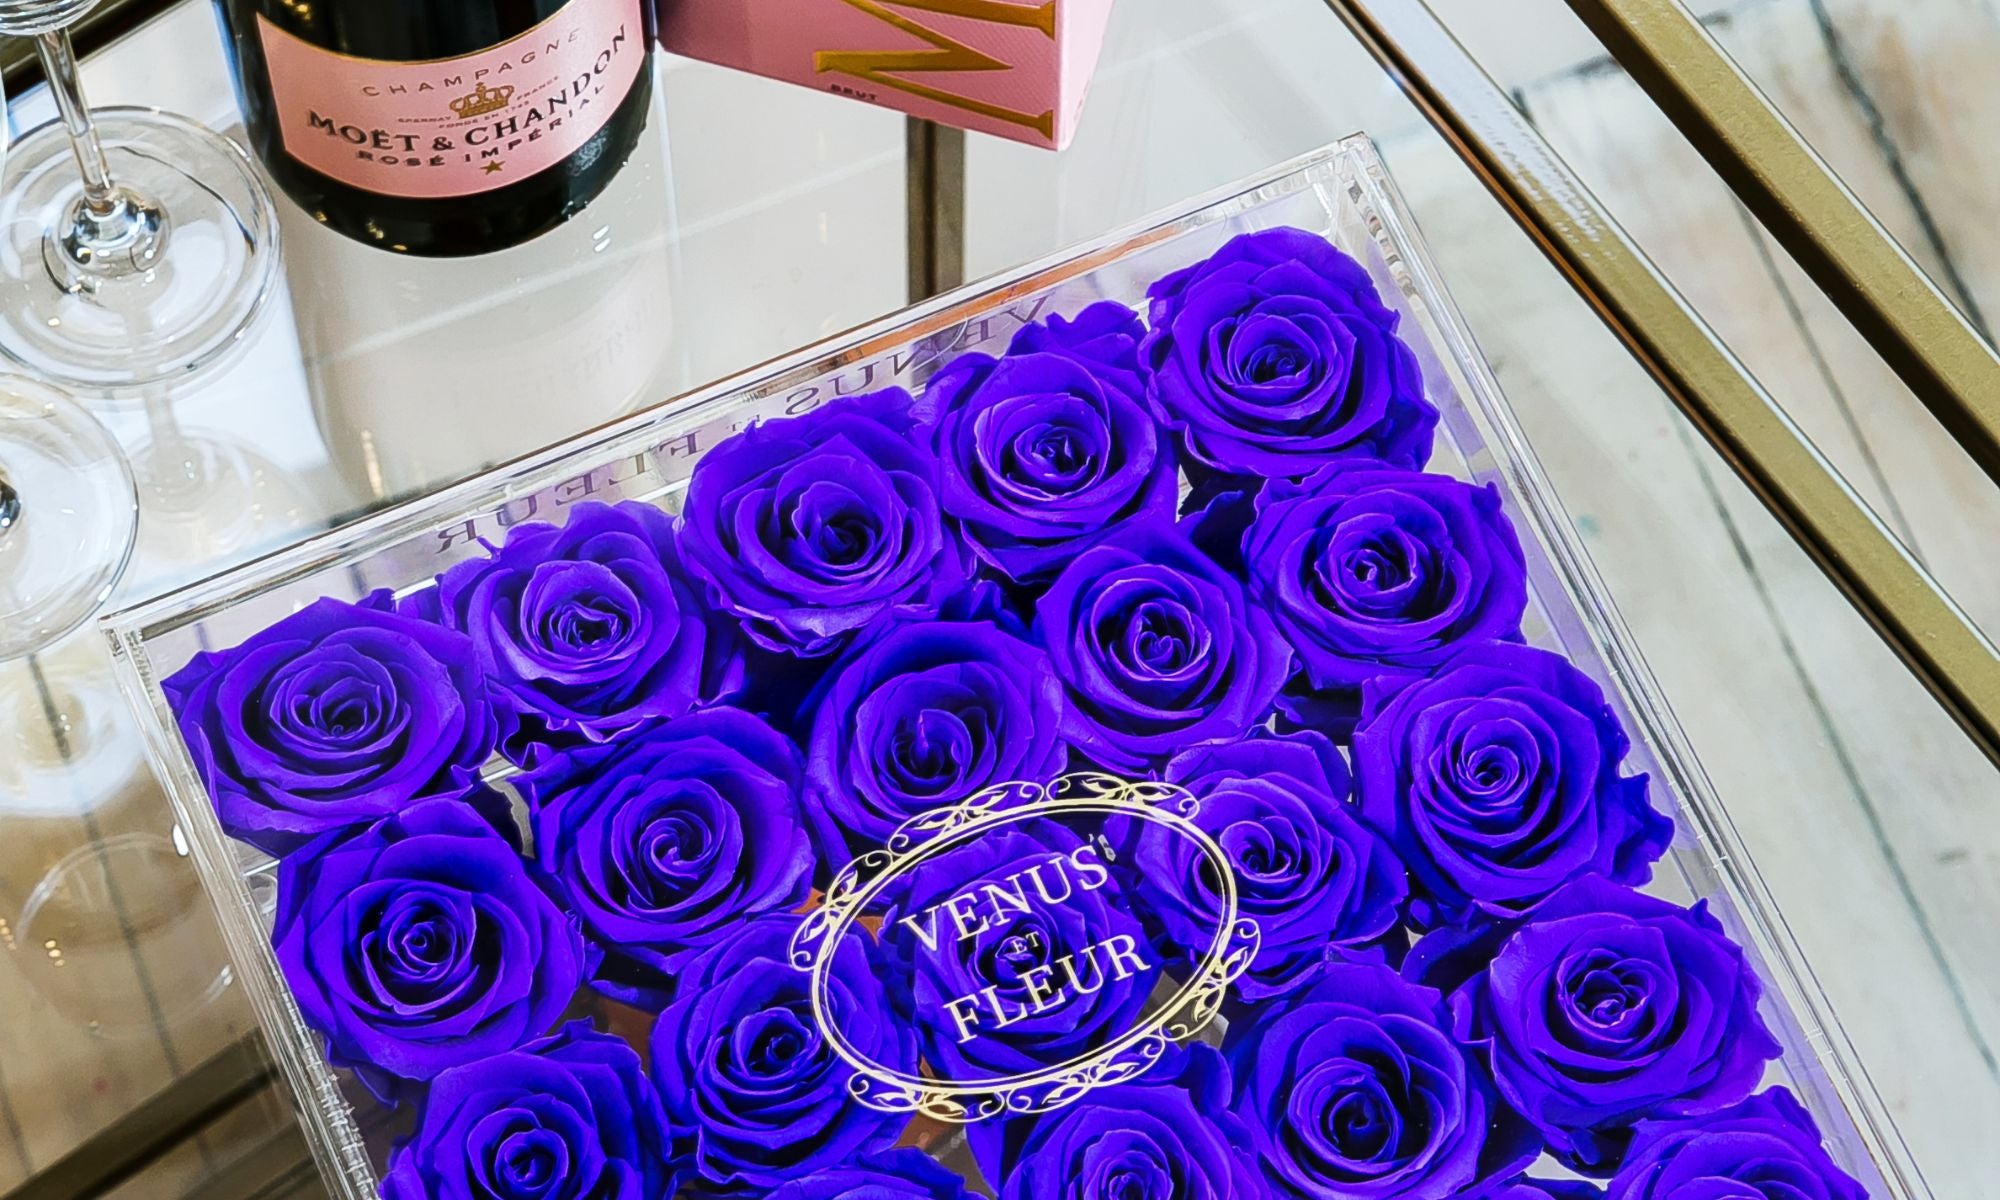 A Beautiful Set of Violet Eternity Roses With Luxury Drinks